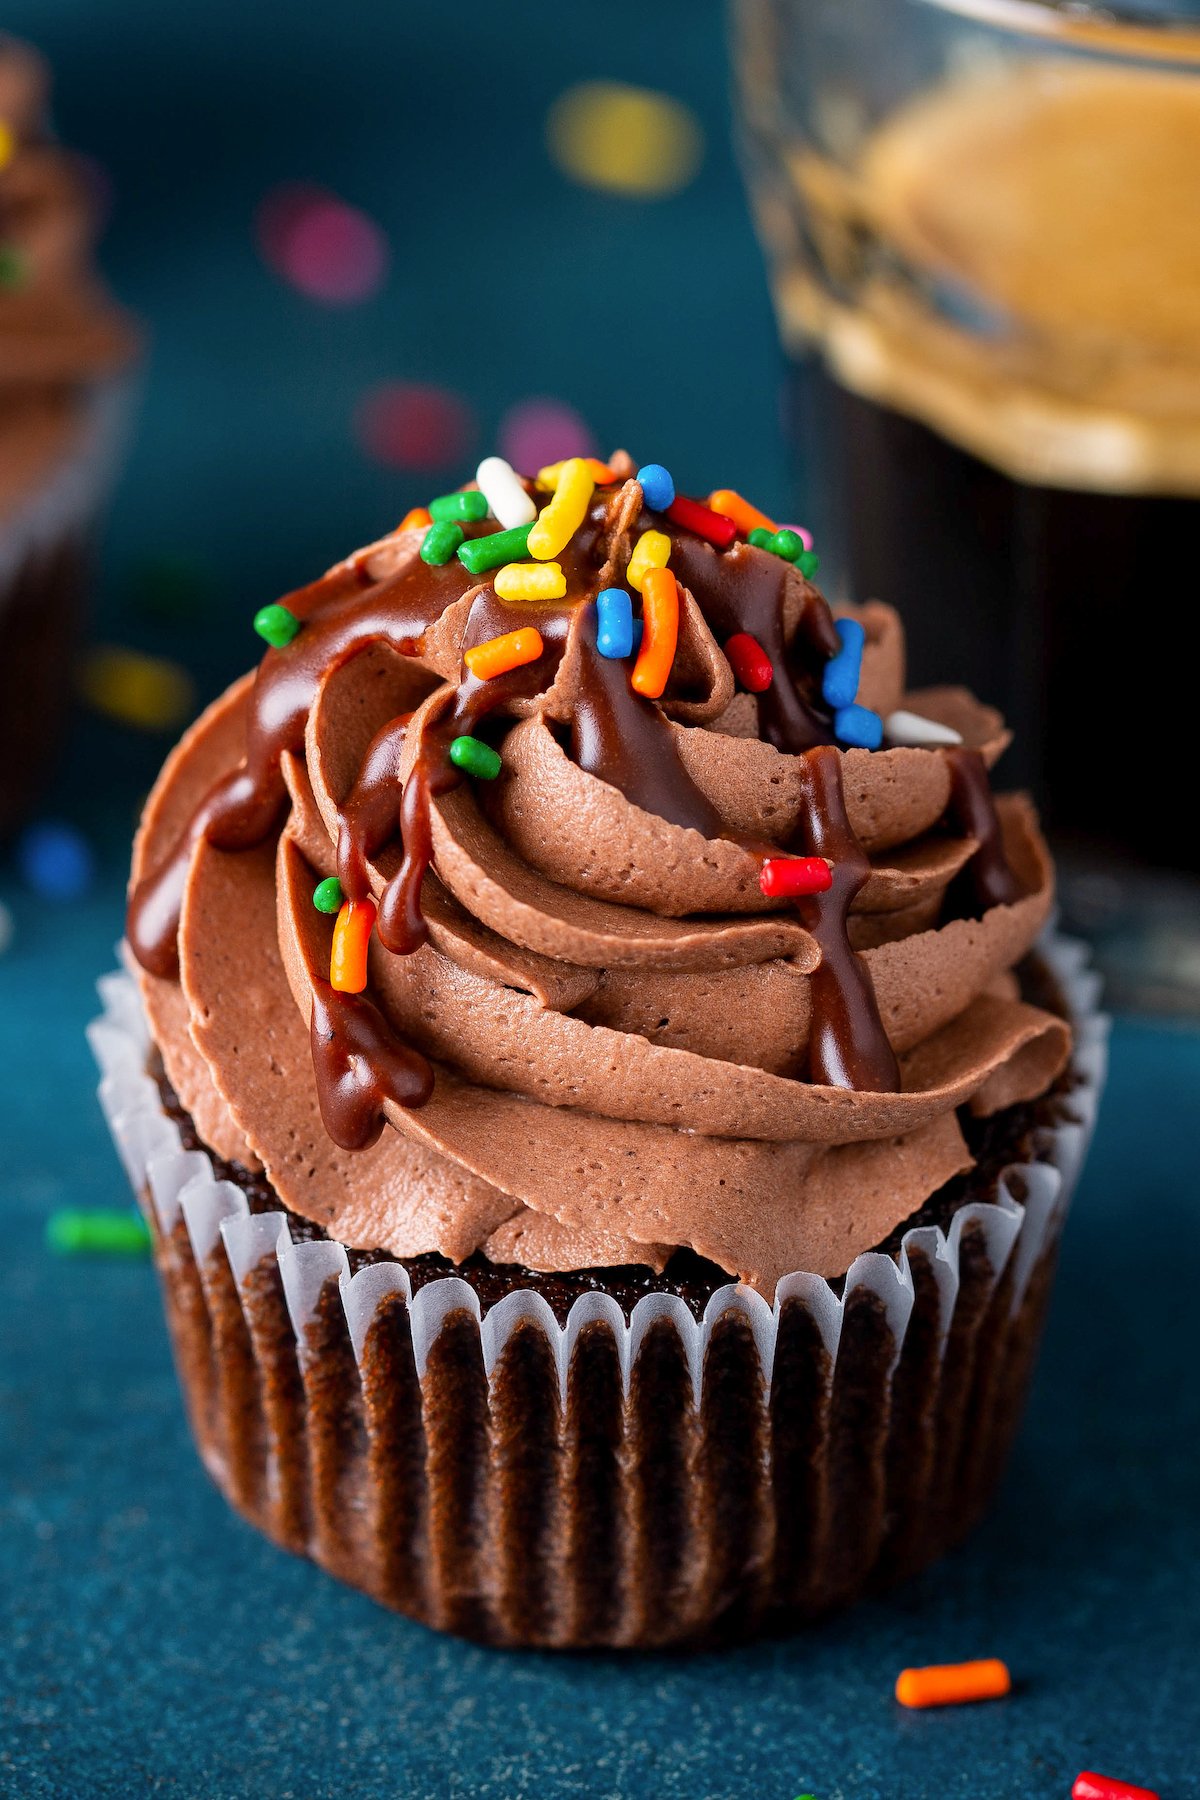 A chocolate cupcake with chocolate frosting and rainbow sprinkles.